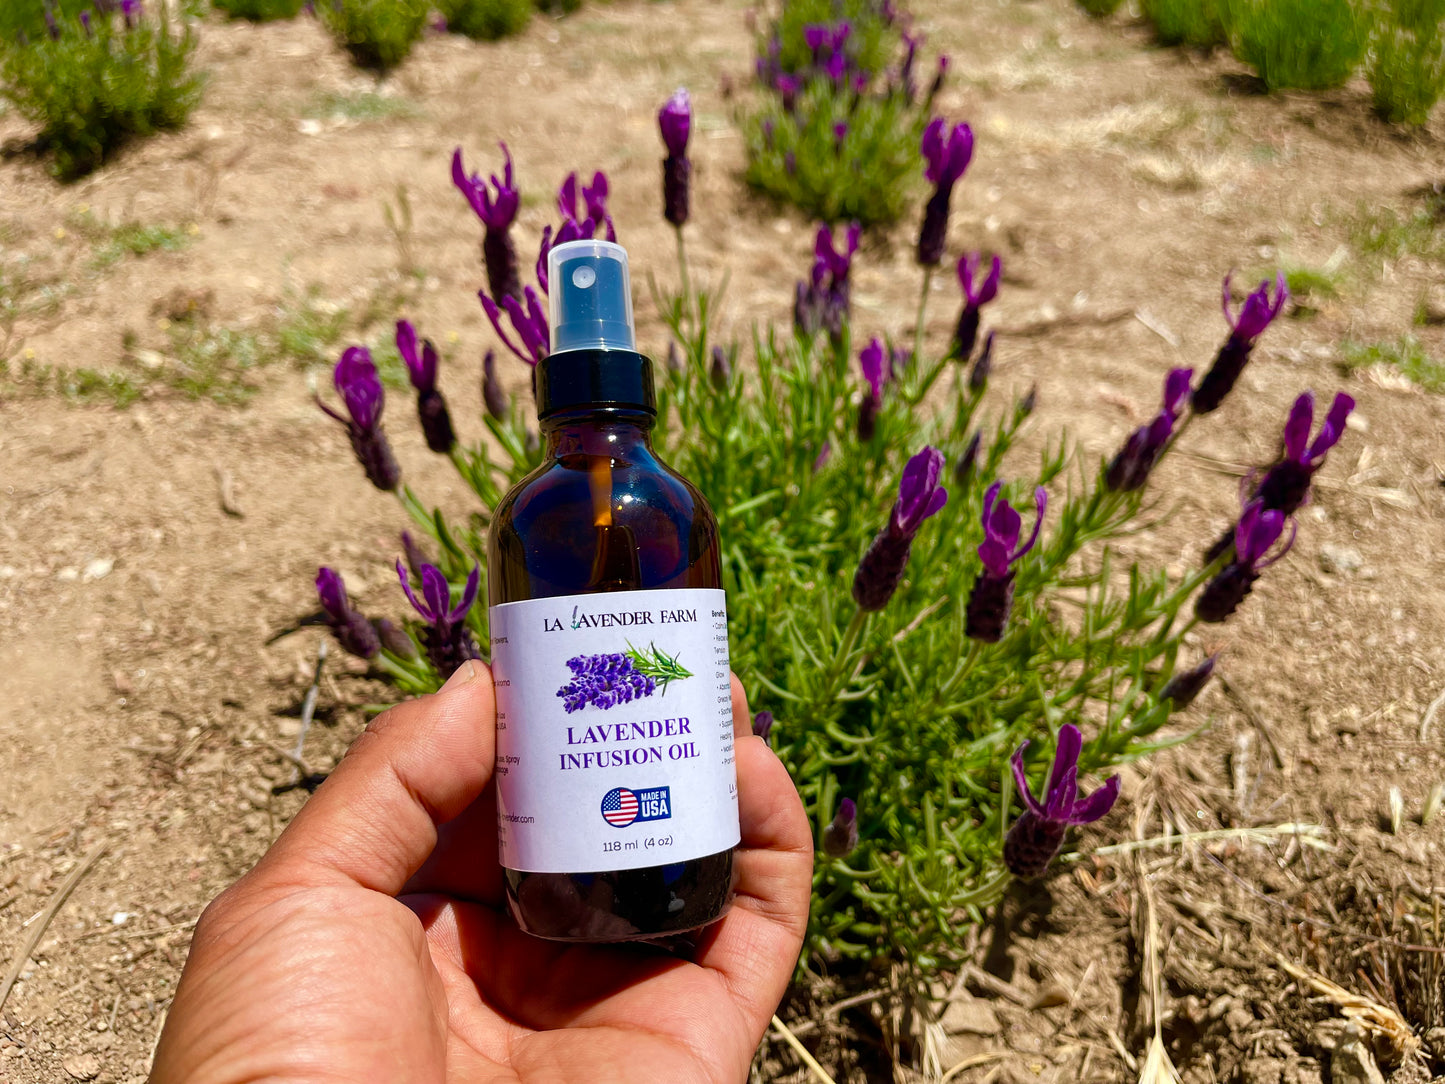 Organic Lavender Infusion Oil - 4oz Glass Bottle (118ml) - Hydrating & Moisturize & nourish the skin - Infused with Grapeseed Oil